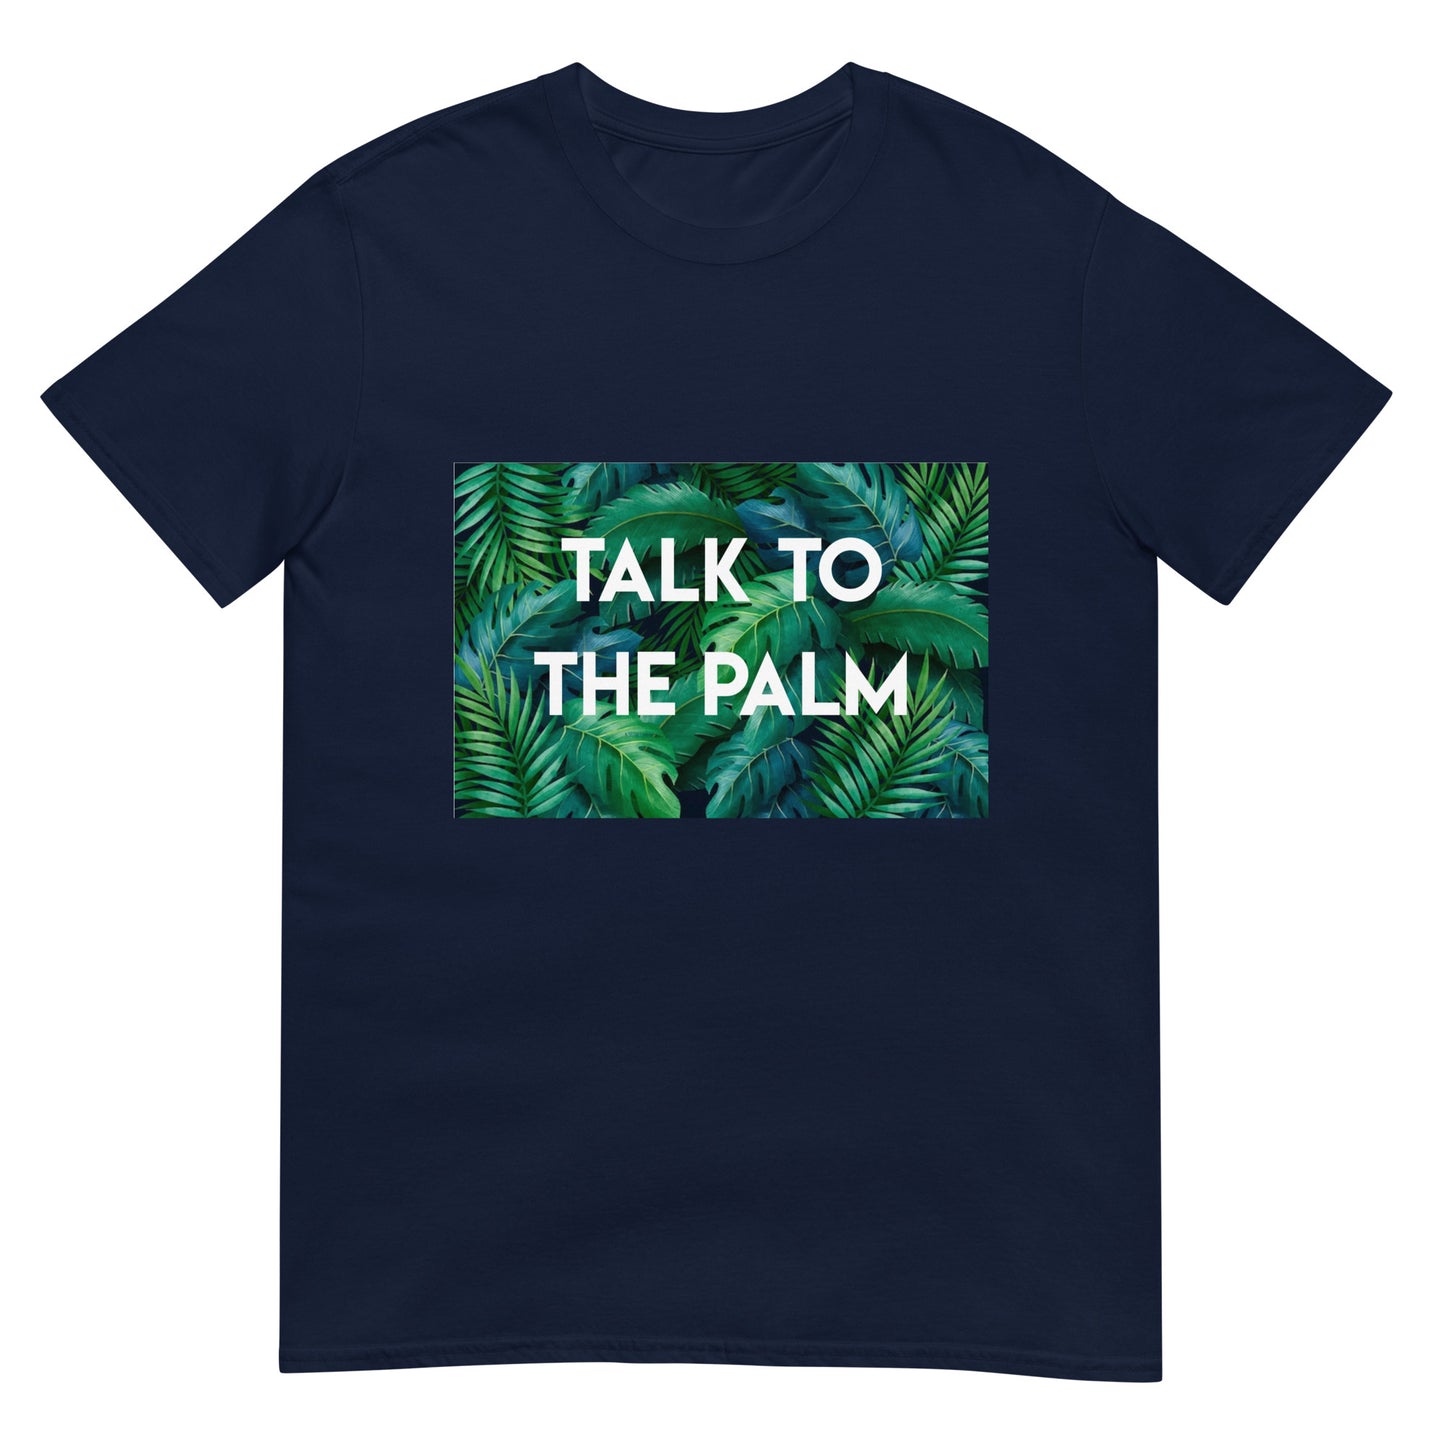 Short-Sleeve 'TALK TO THE PALM' Soft Feel T-Shirt